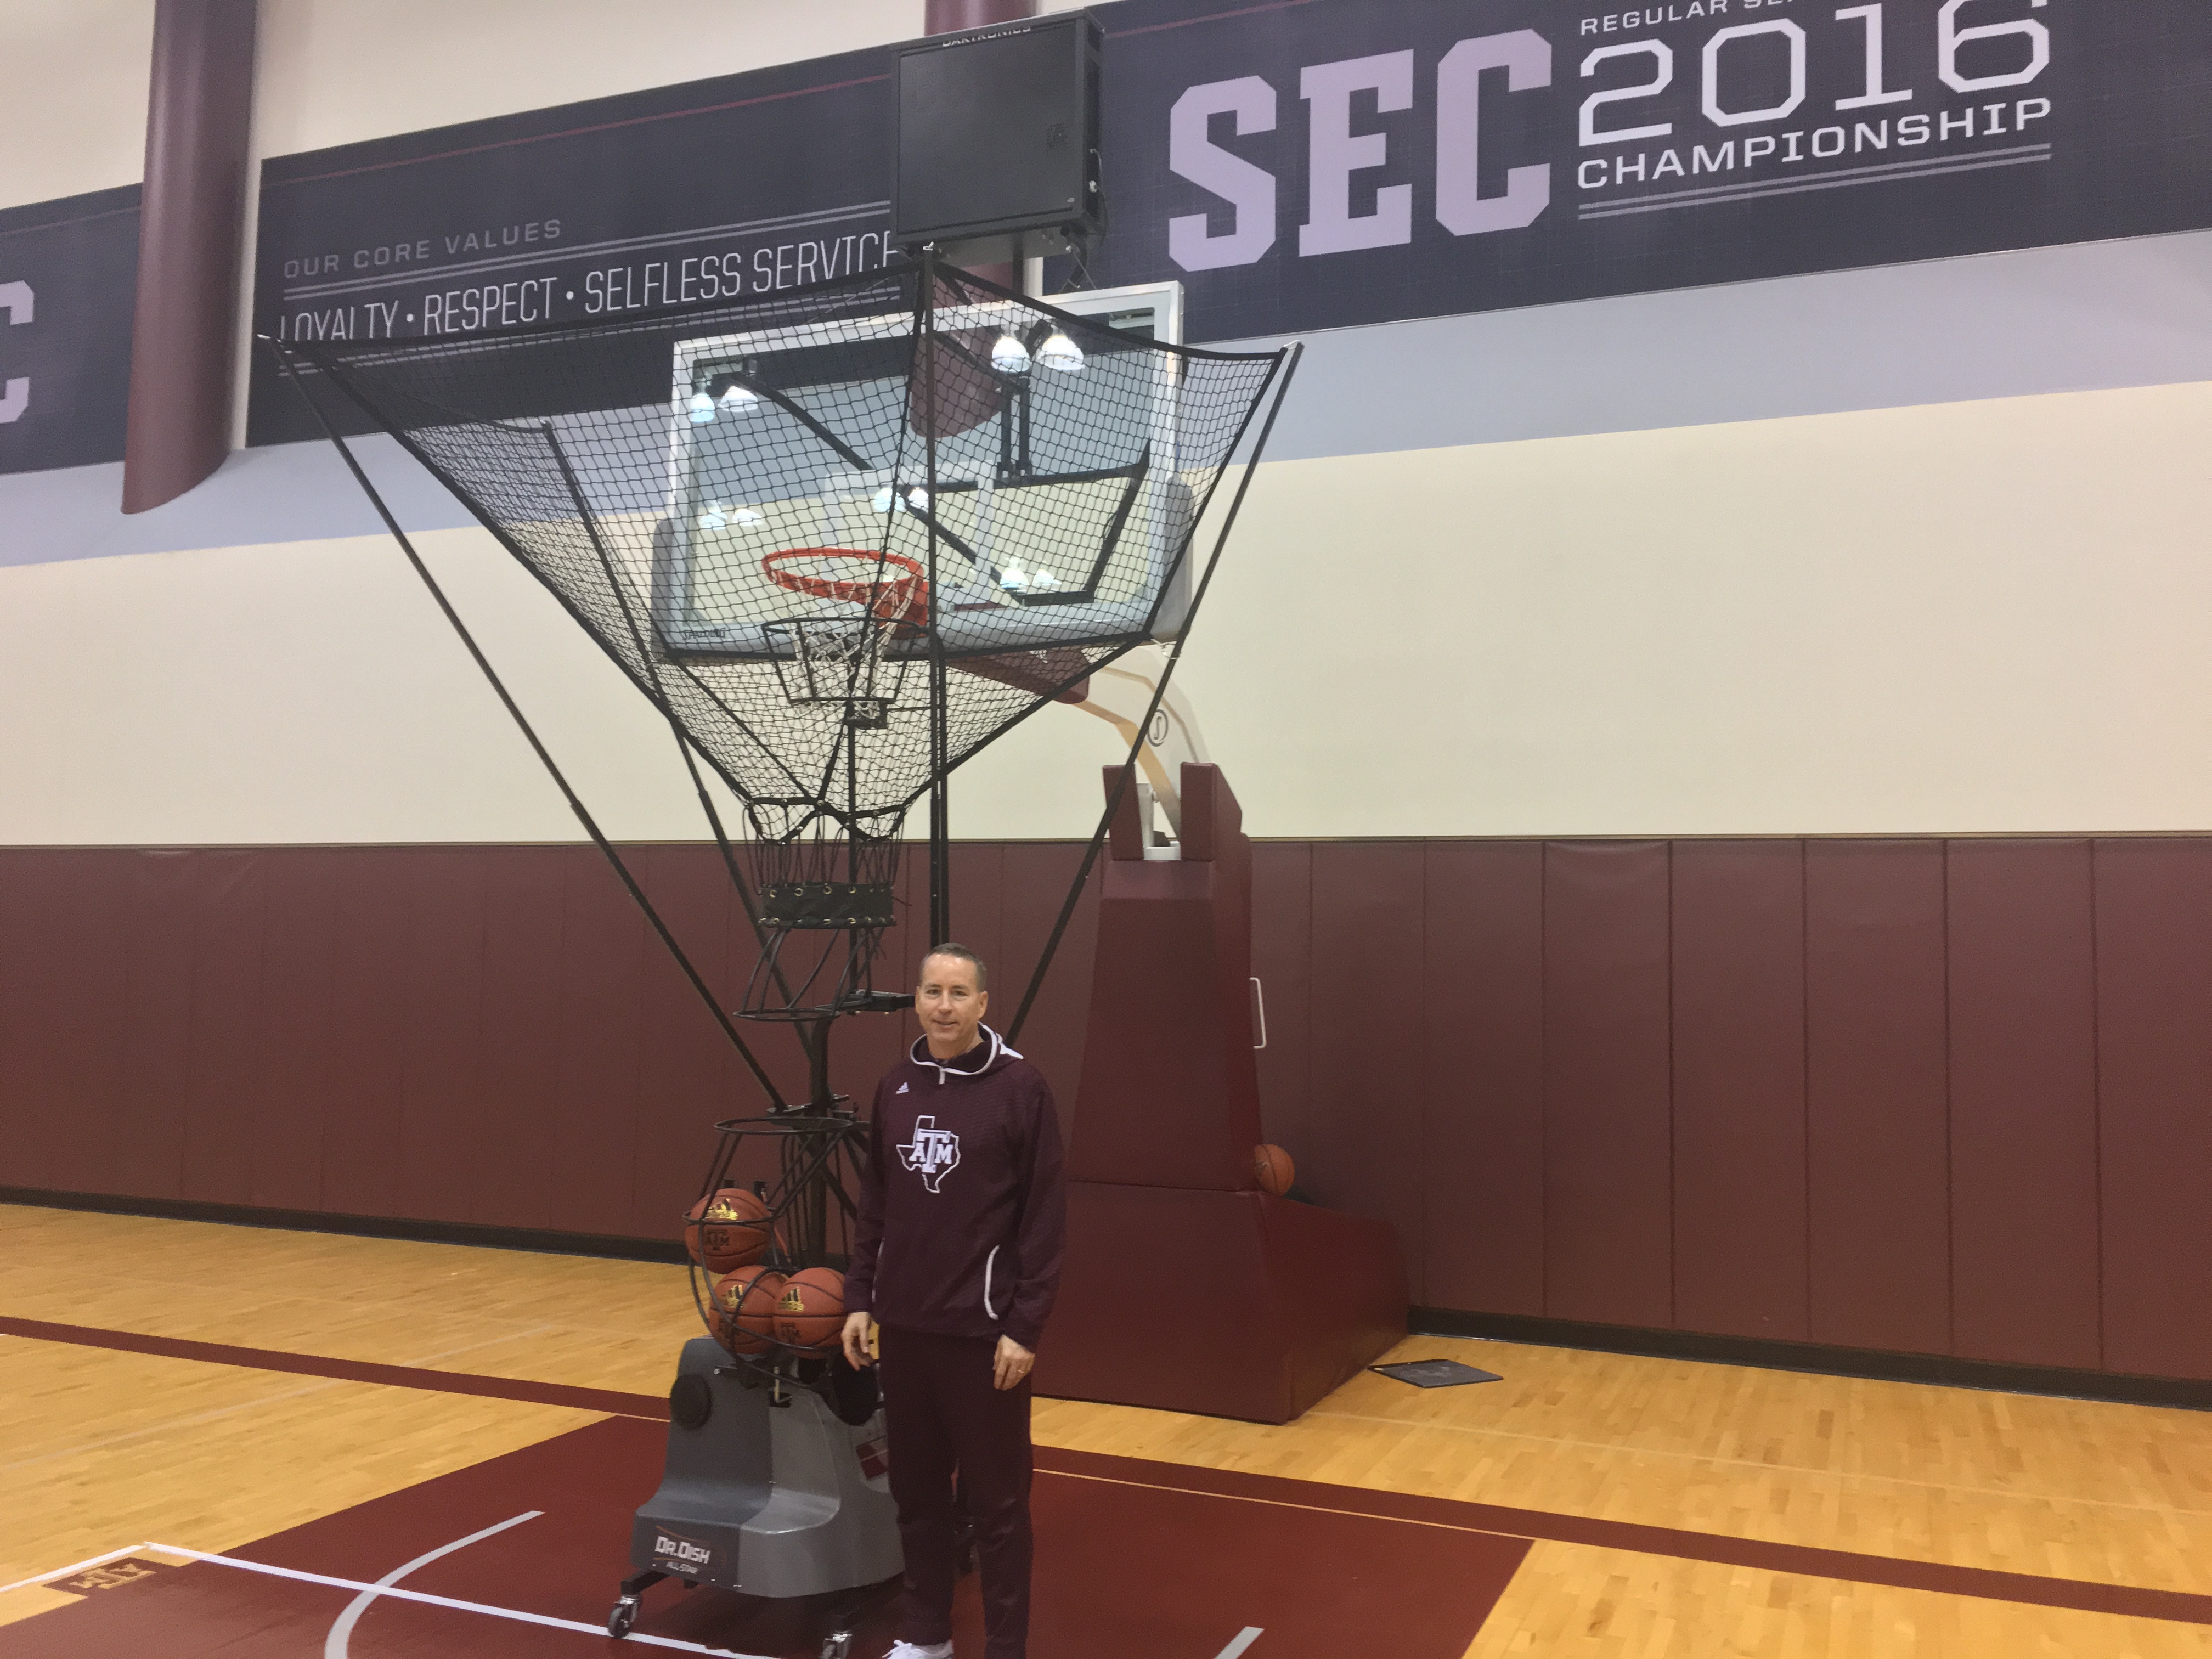 How Texas A&M is Training Their Post Players With Dr. Dish